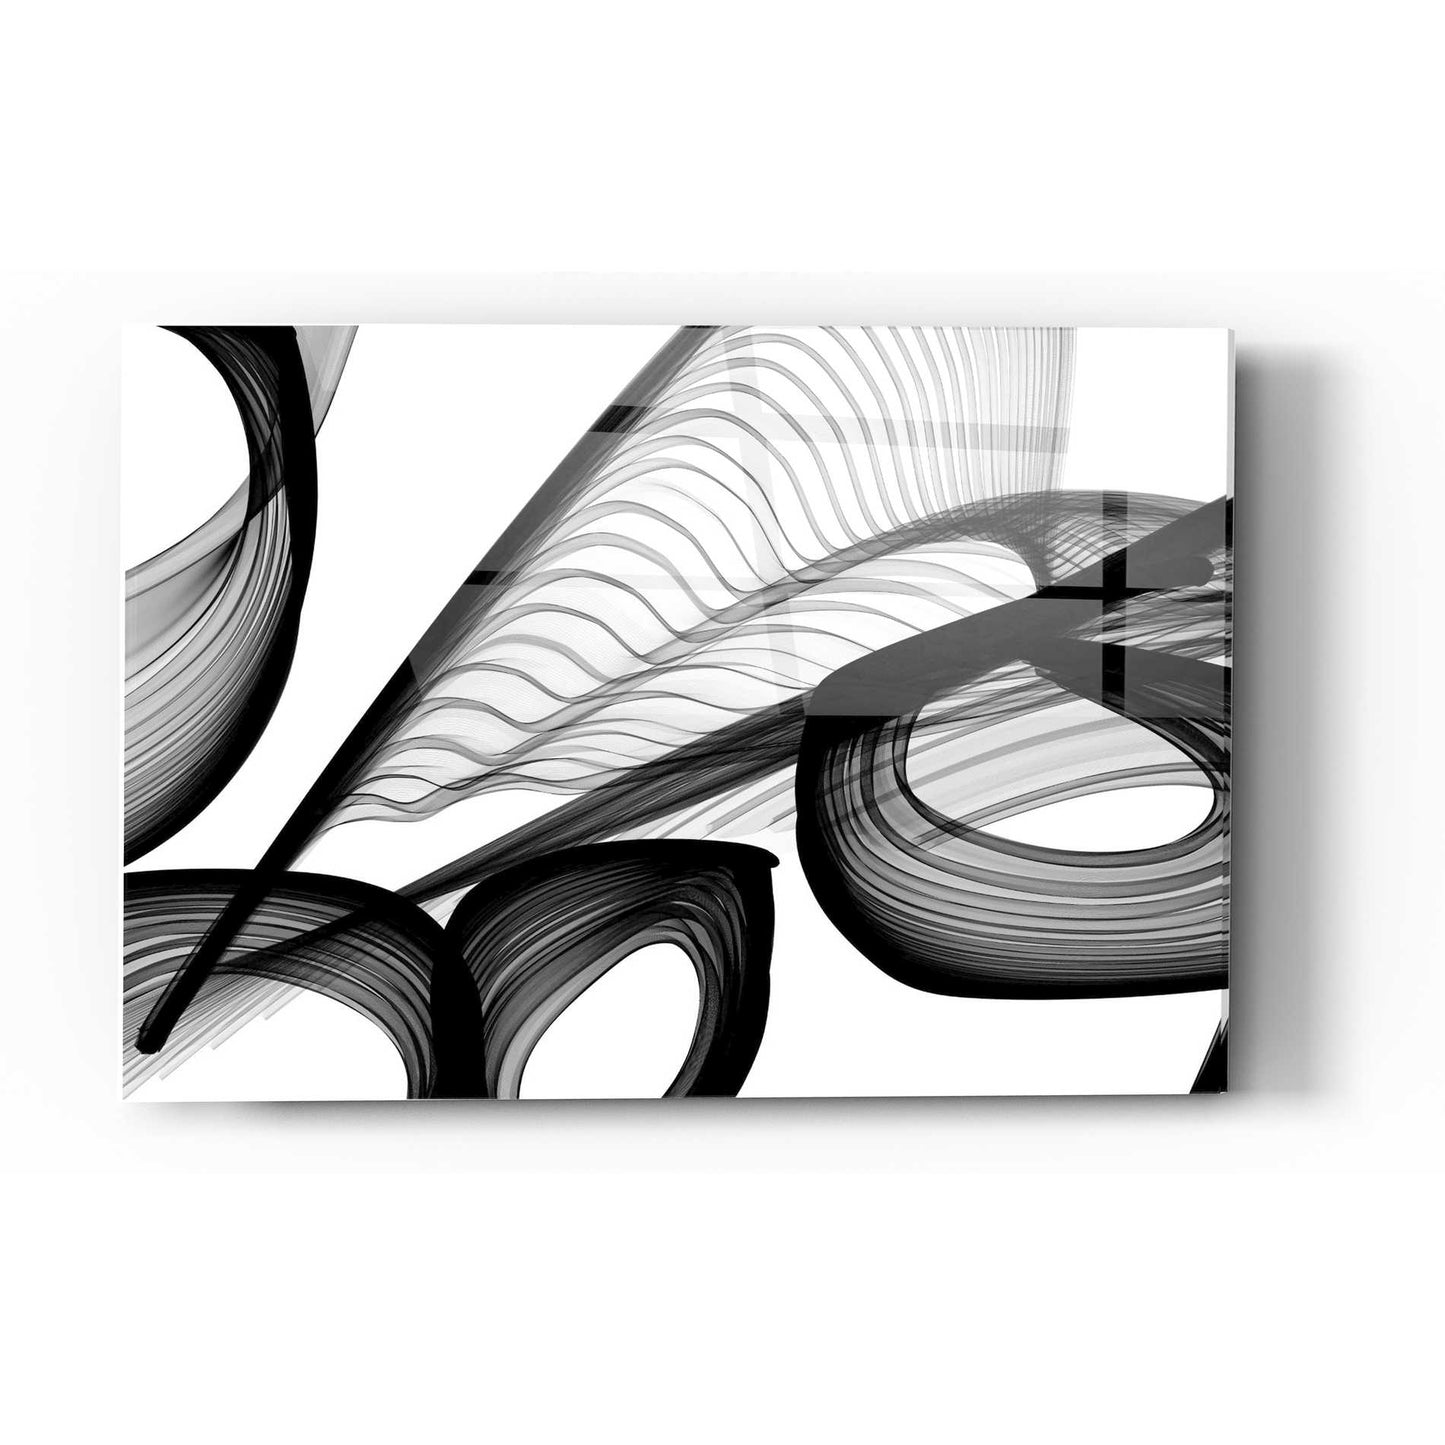 Epic Art 'Abstract Black and White 22-21' by Irena Orlov, Acrylic Glass Wall Art,12x16